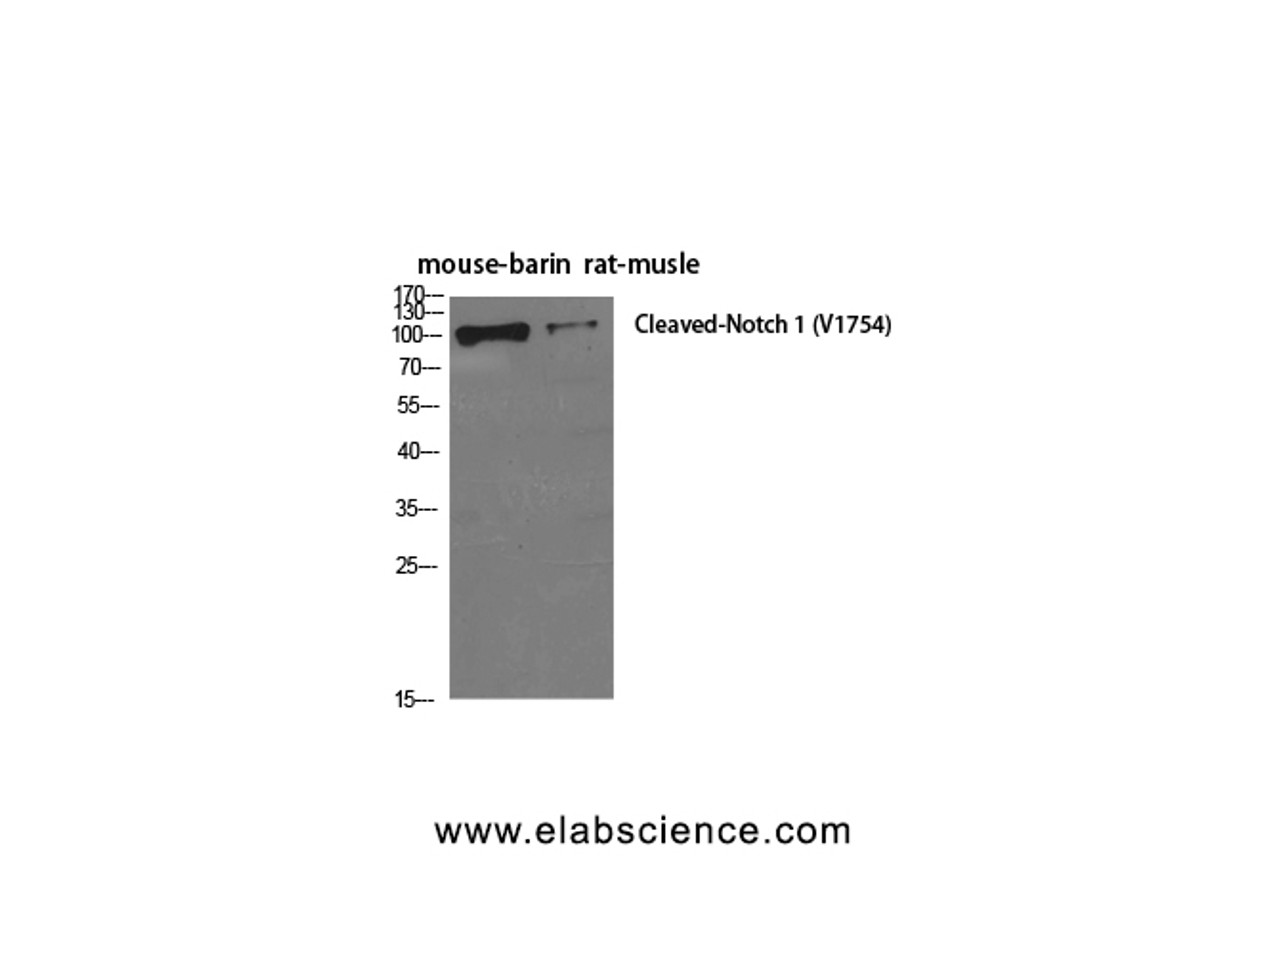 Western Blot analysis of Mouse brain, Rat musle using Cleaved-NOTCH1 (V1754) Polyclonal Antibody at dilution of 1:500.